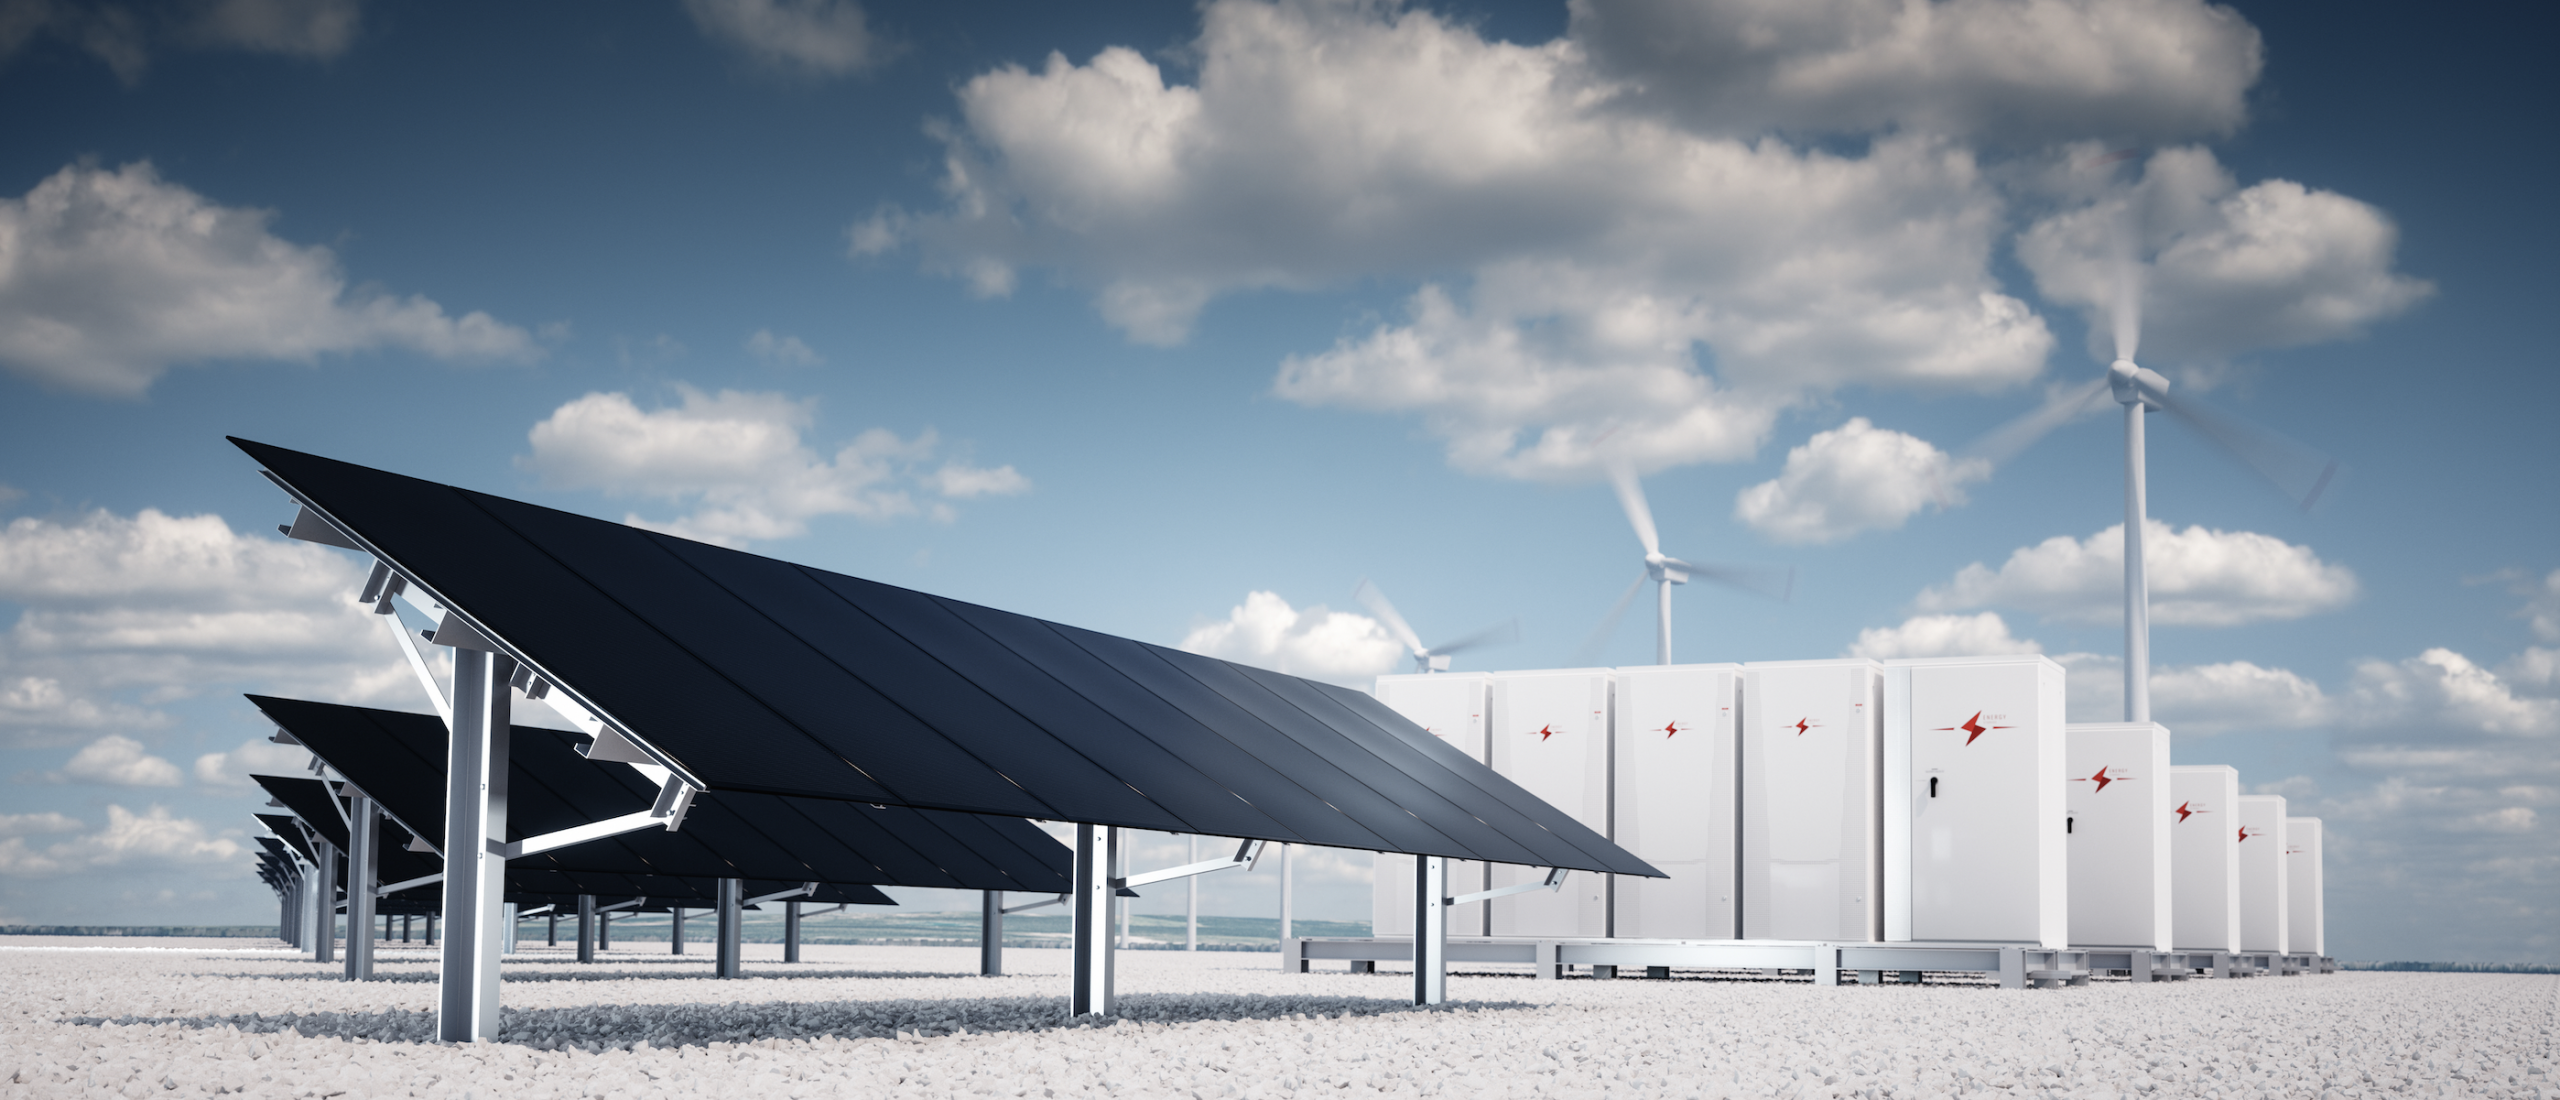 Energy Storage Market, Applications, and ESS Factory Audits